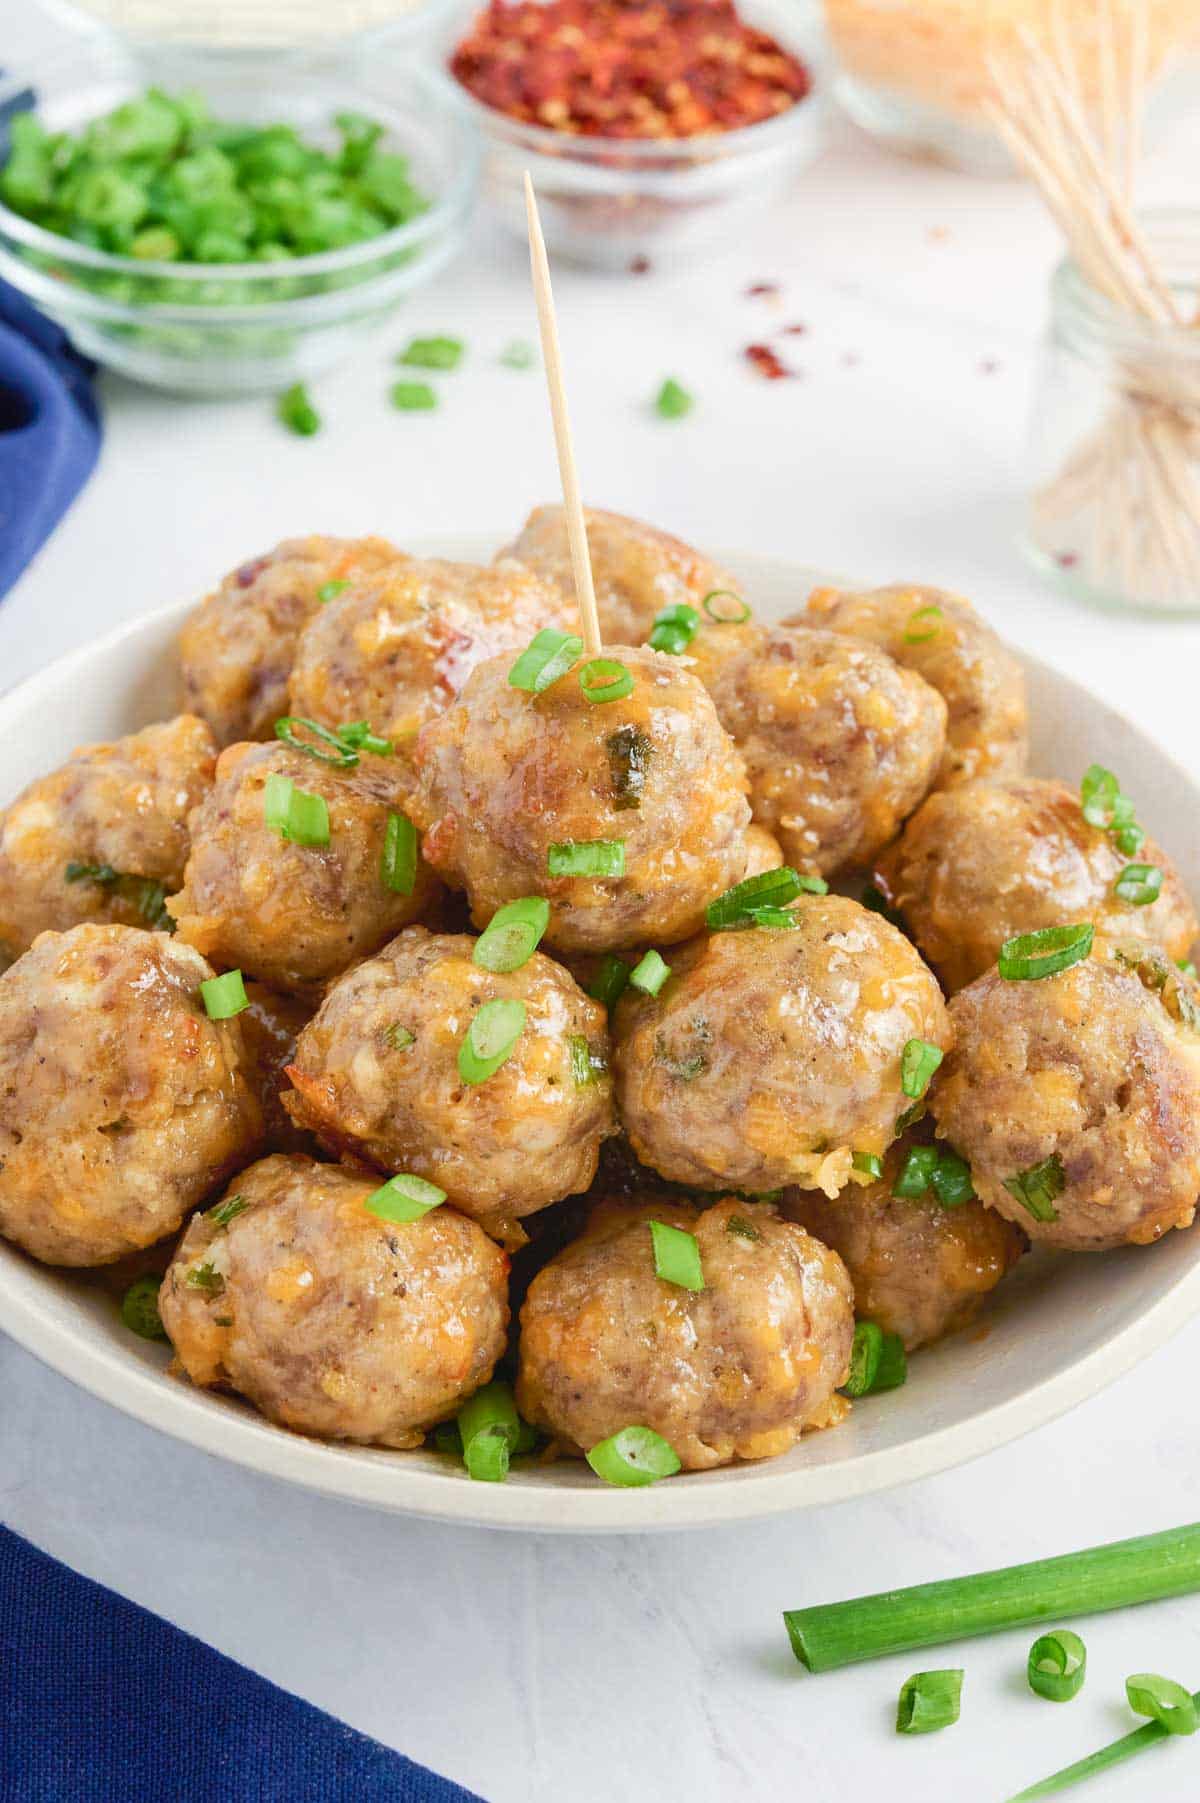 A toothpick is inserted into a sausage ball from a pile on a plate.